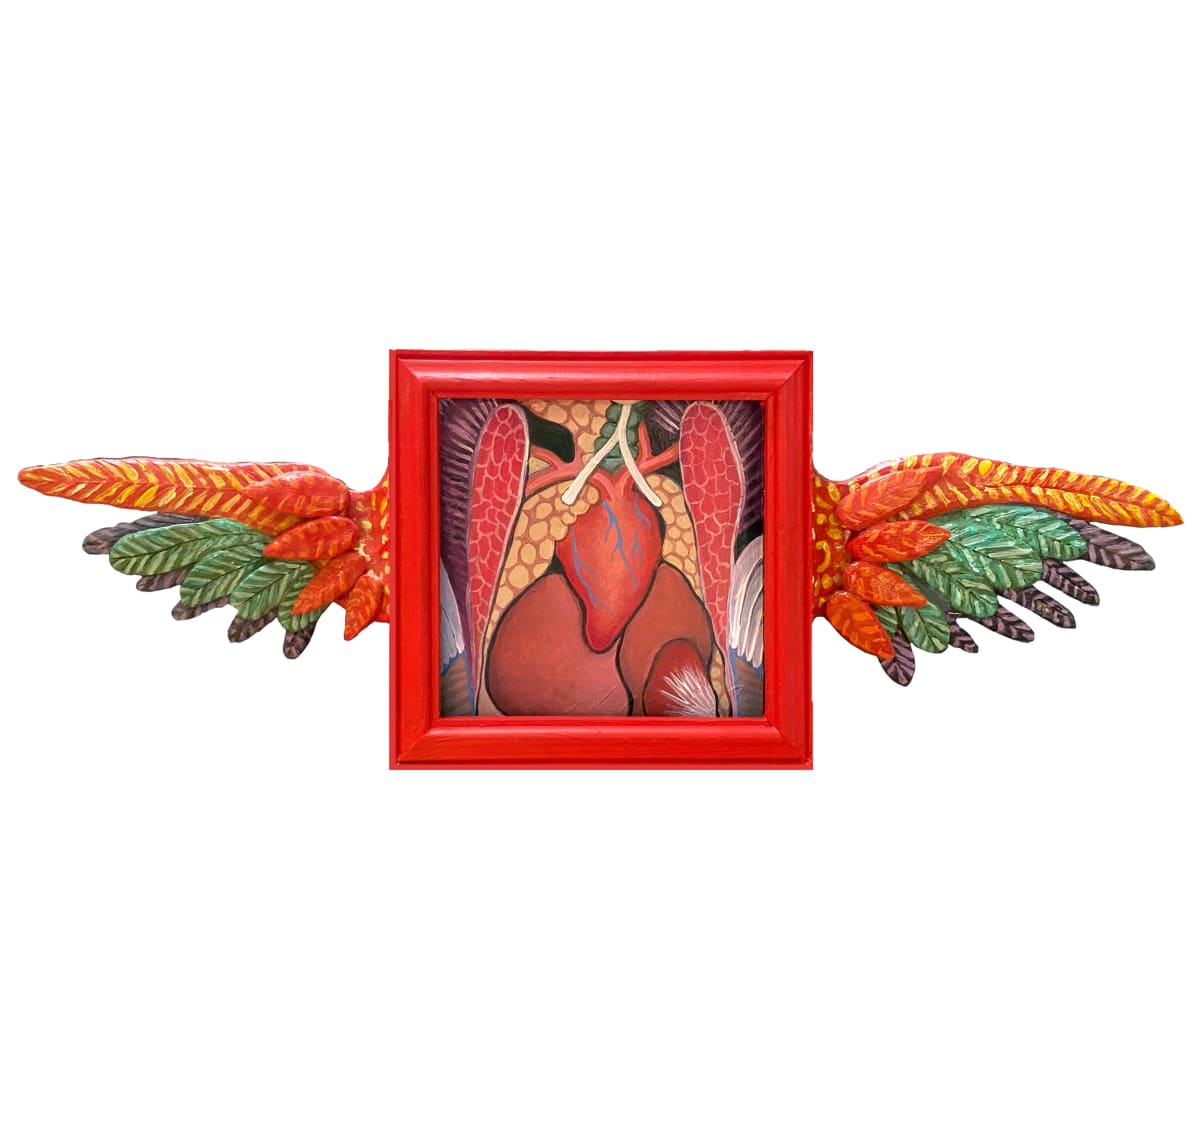 Wishbone by Sarah Stone  Image: 7" x 7" frame w assemblage wings, acrylic on wood painting